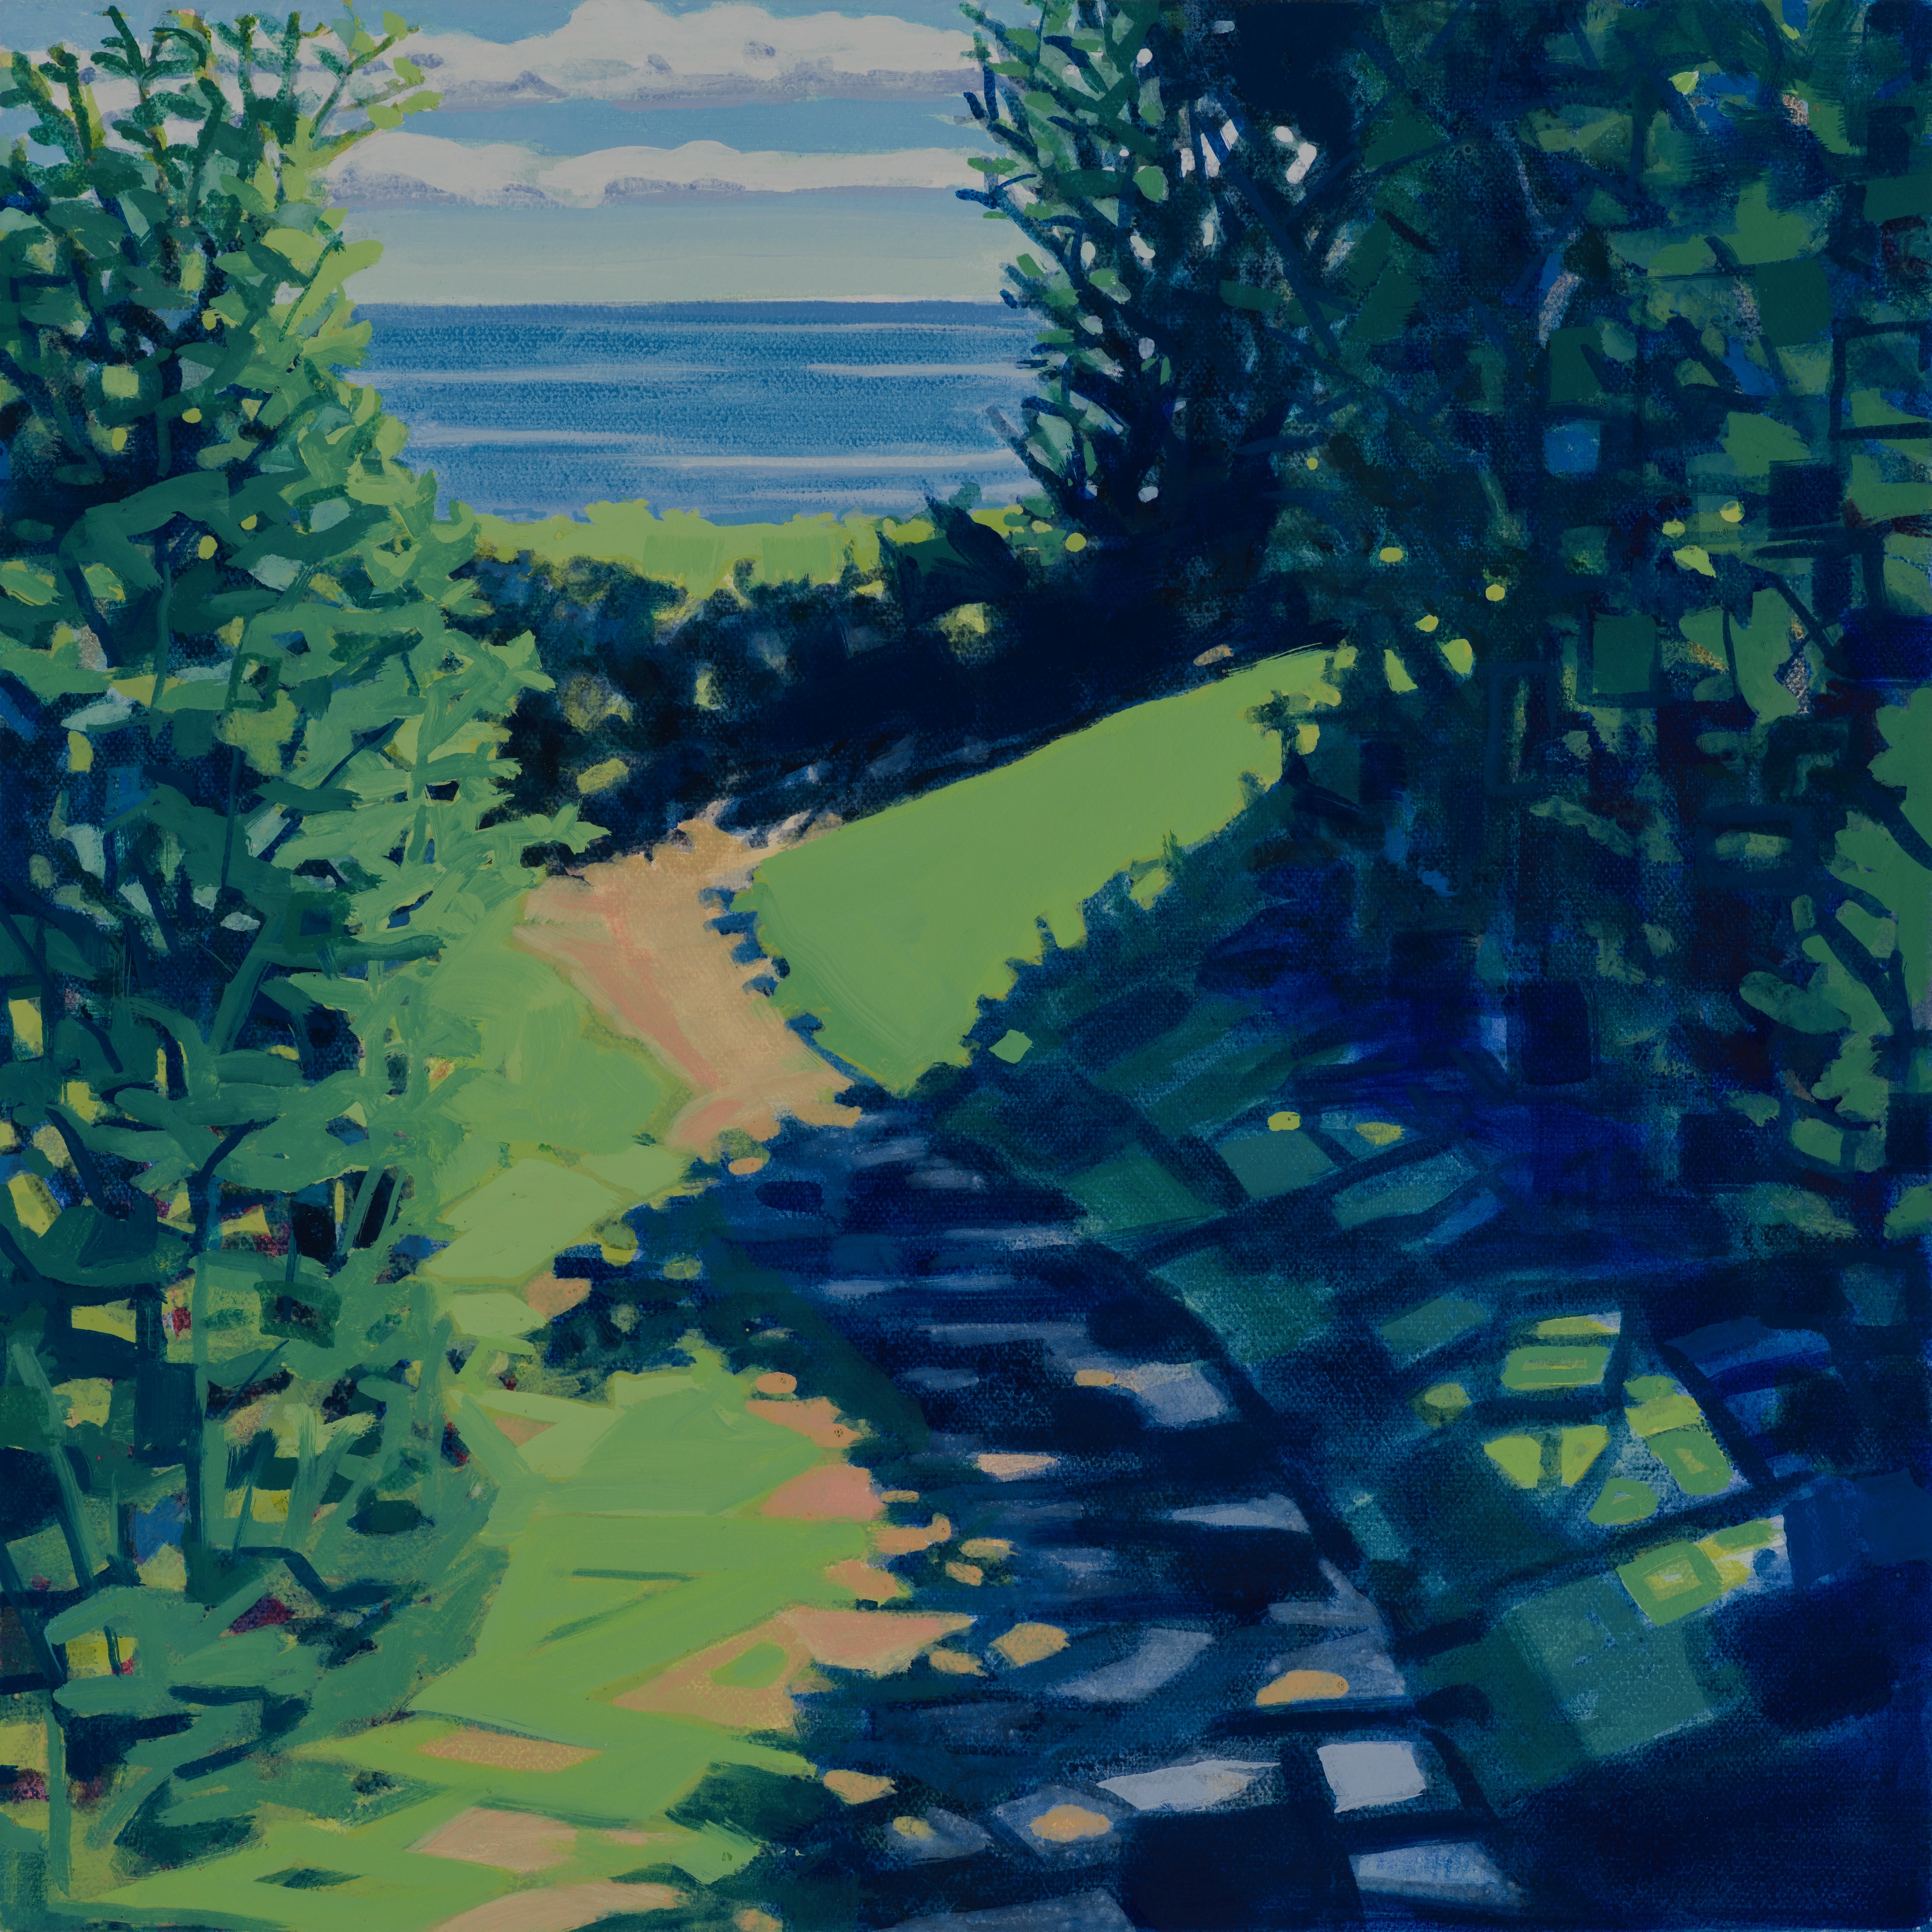 Shadows, 8/30/20, 10:34, 43.532962, -70.313337, 2021, oil on canvas, 12 x 12 inches